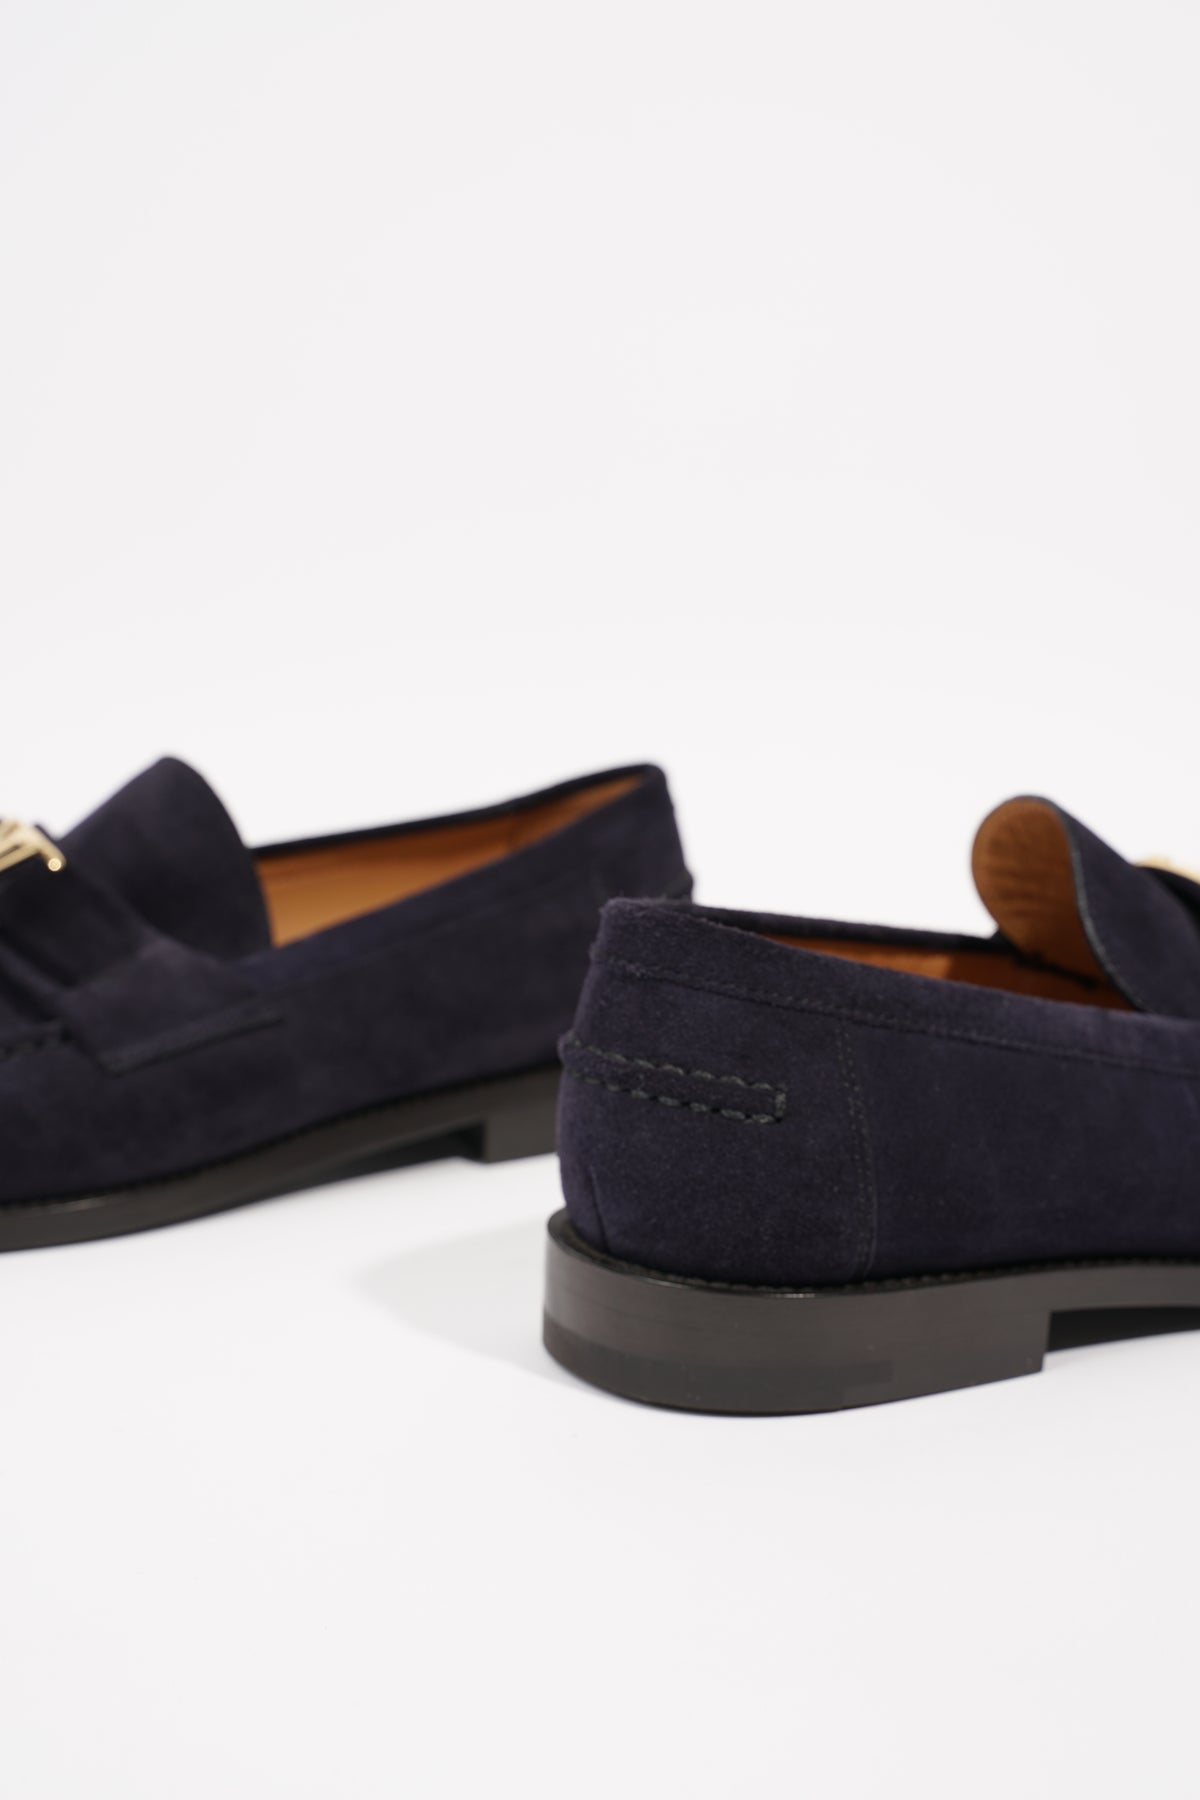 Louis Vuitton Suede Loafers UK 8.5 | 9.5